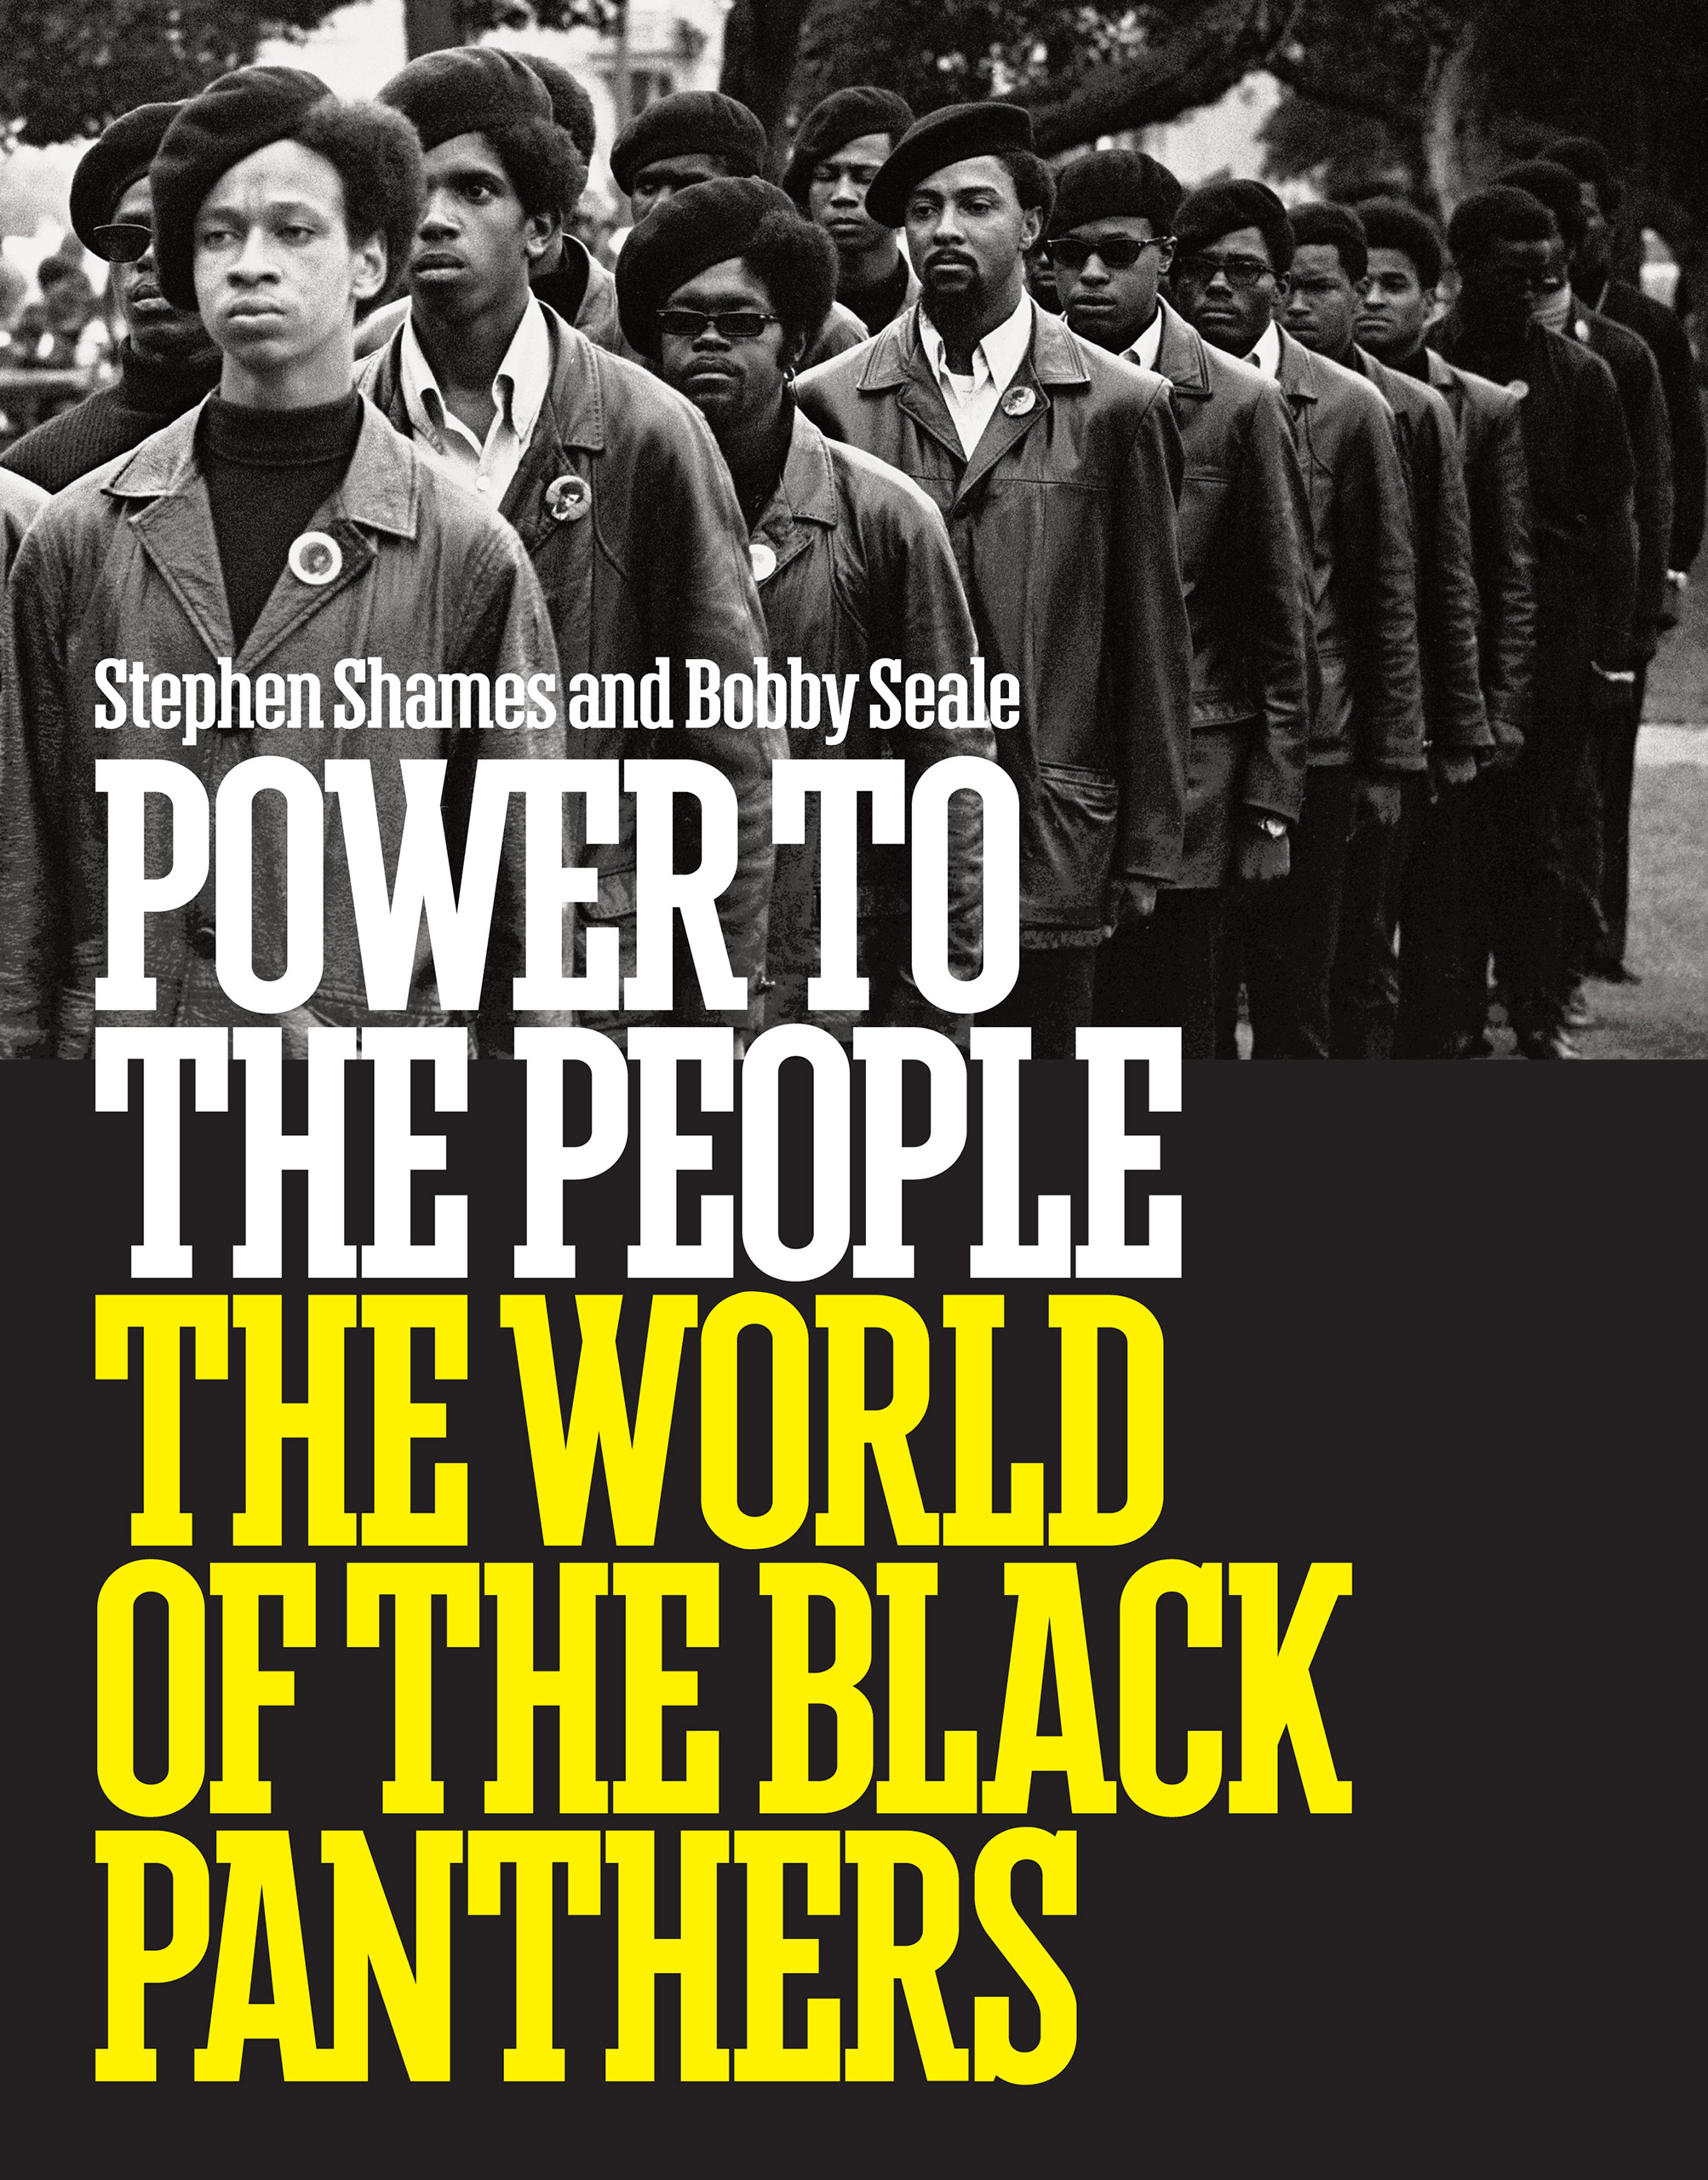 Power to the People: The World of the Black Panthers, Photographs by Stephen Shames; text by Bobby Seale. Published by Abrams.